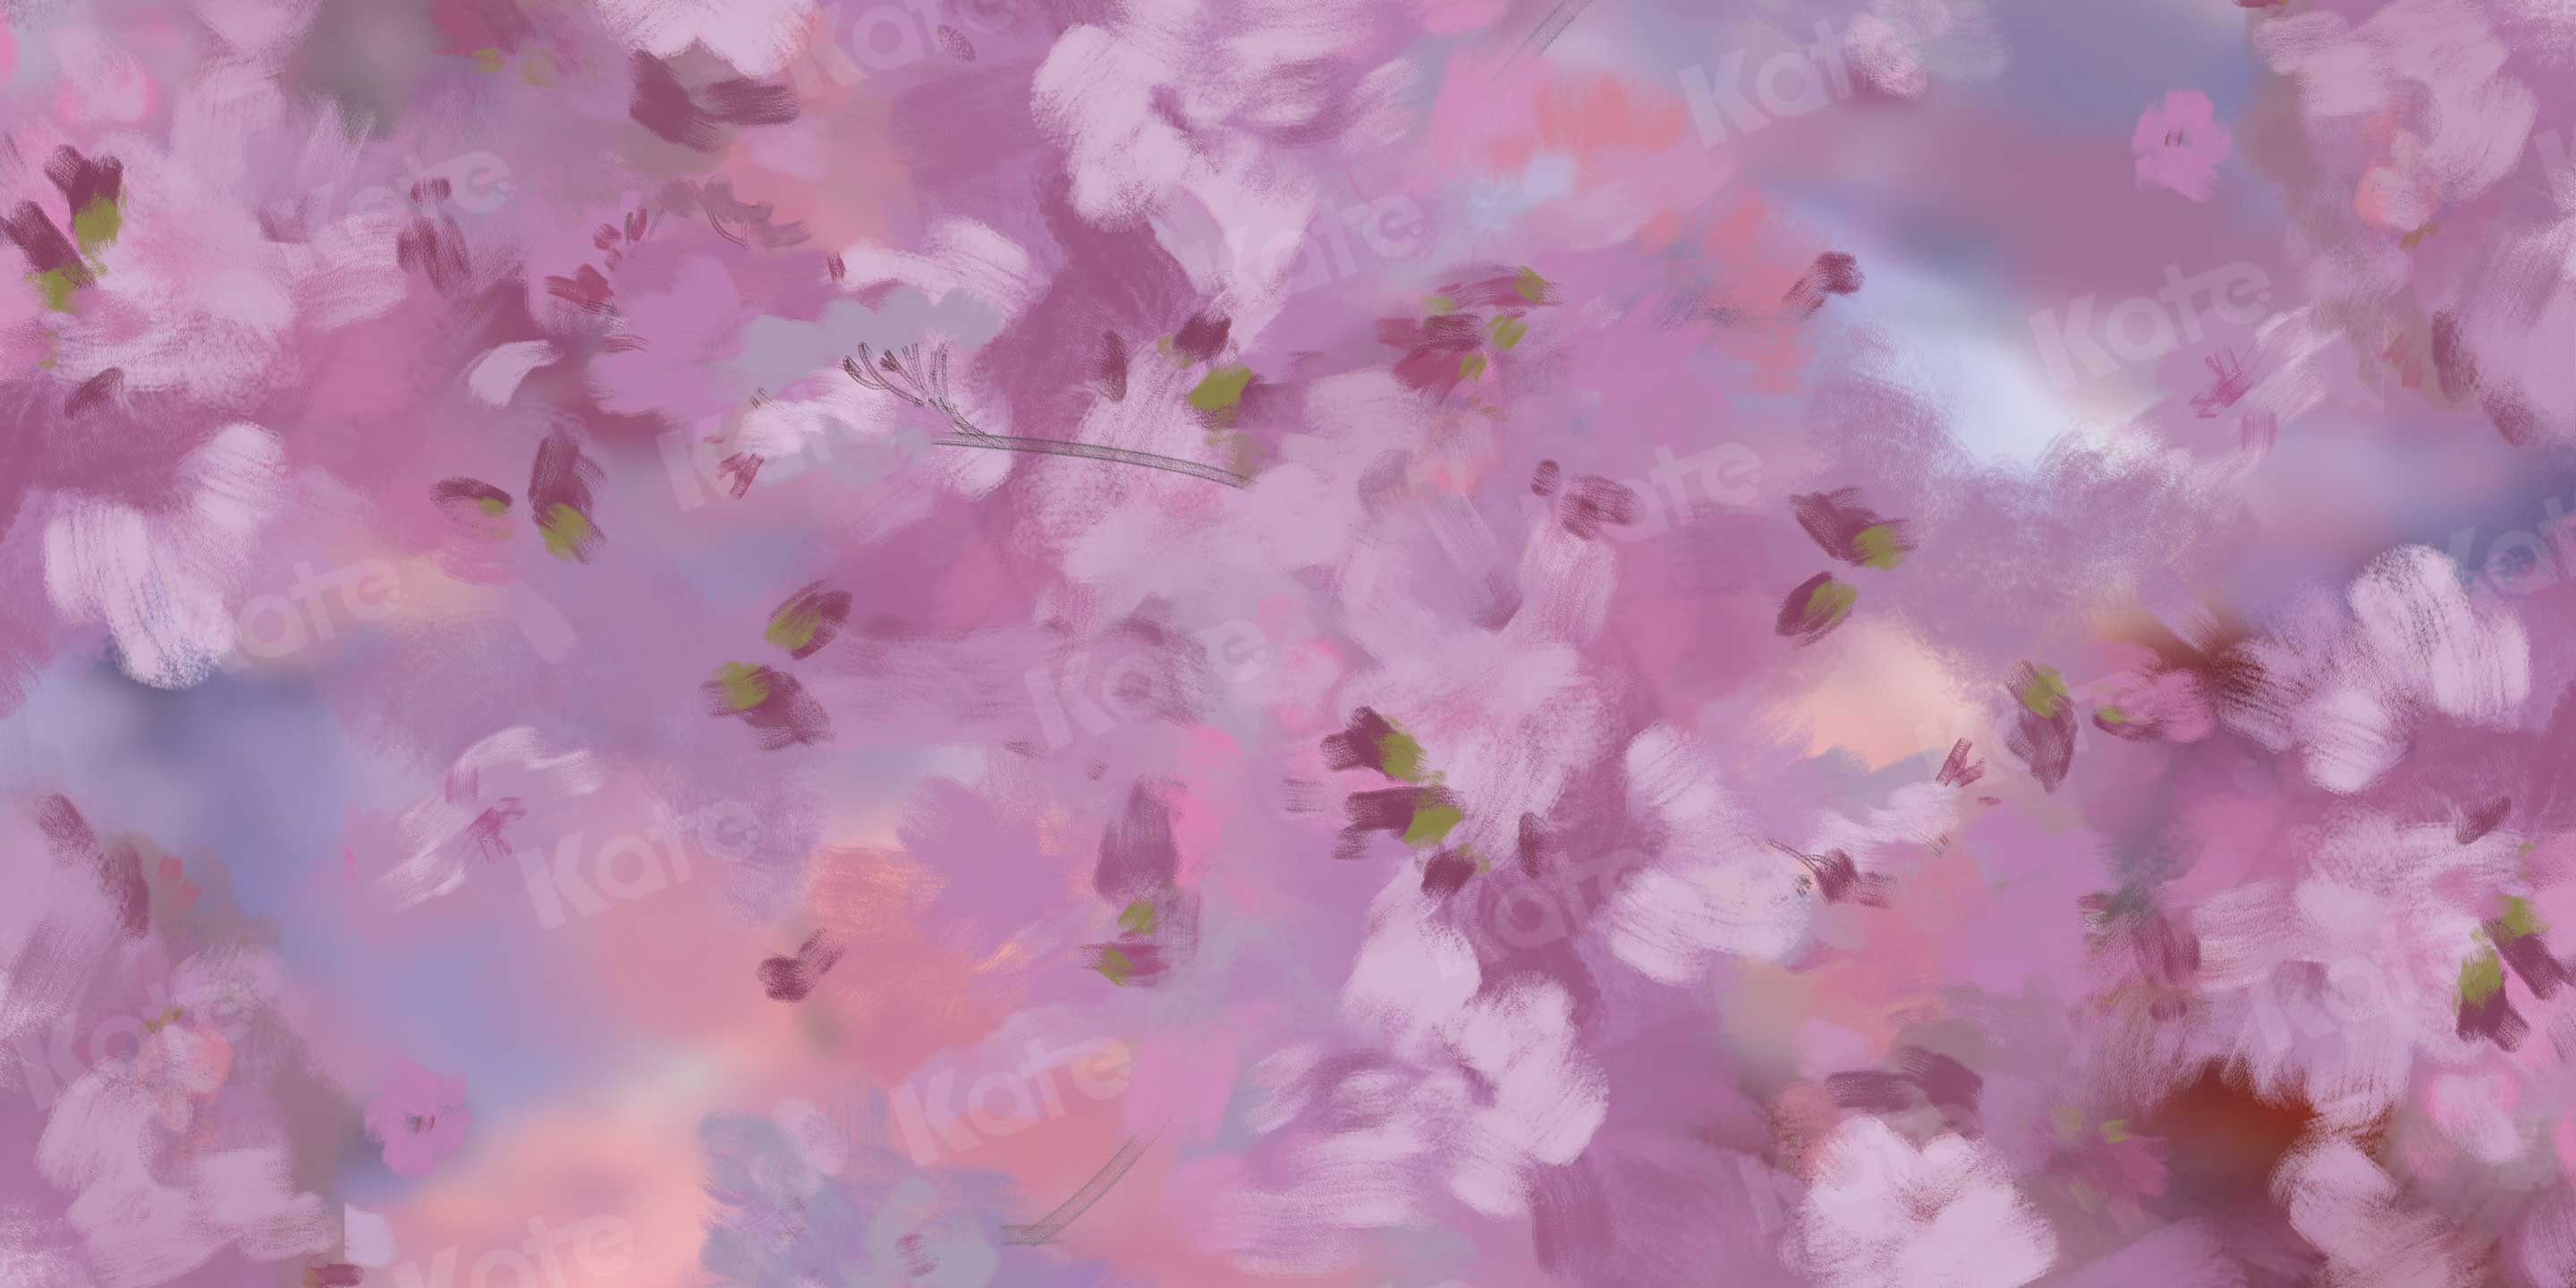 Kate Fine Art Painting Pink Floral Backdrop for Photography